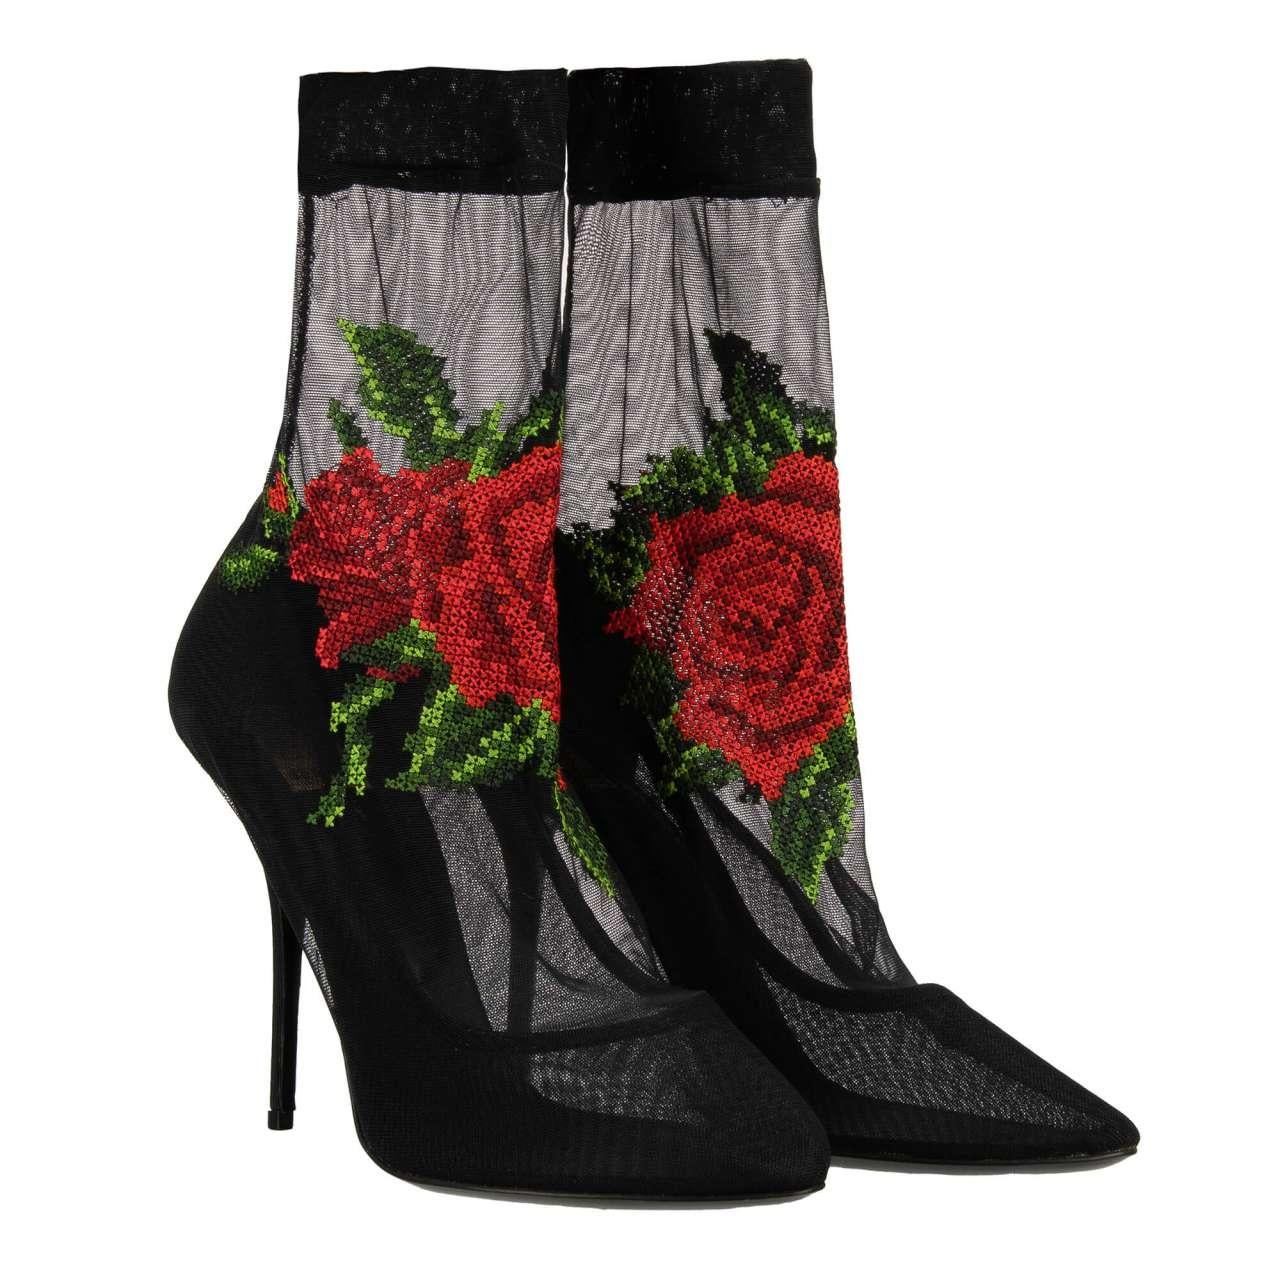 - Tulle Pumps COCO covered with rose embroidery in red and black by DOLCE & GABBANA - New with Box - MADE IN ITALY - Model: CT0727-AO172-80999 - Material: 85% Polyamid, 8% Lambskin, 7% Elastane - Inner Material: leather - Sole: Leather - Color: